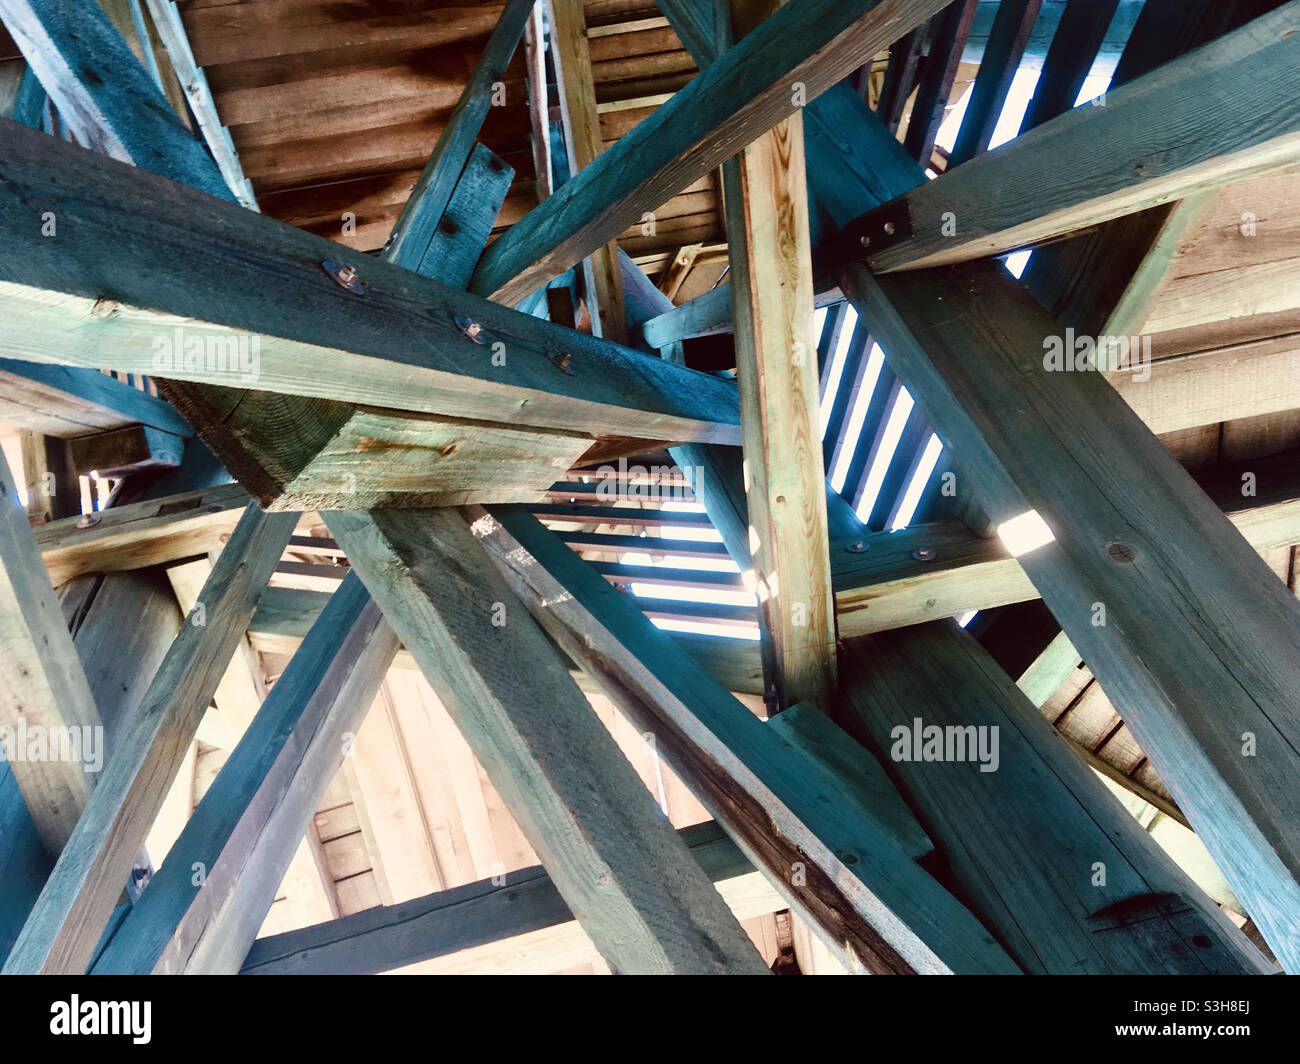 Wooden structure of Hubertus lookout tower viewed from below, Sopron, Hungary Stock Photo